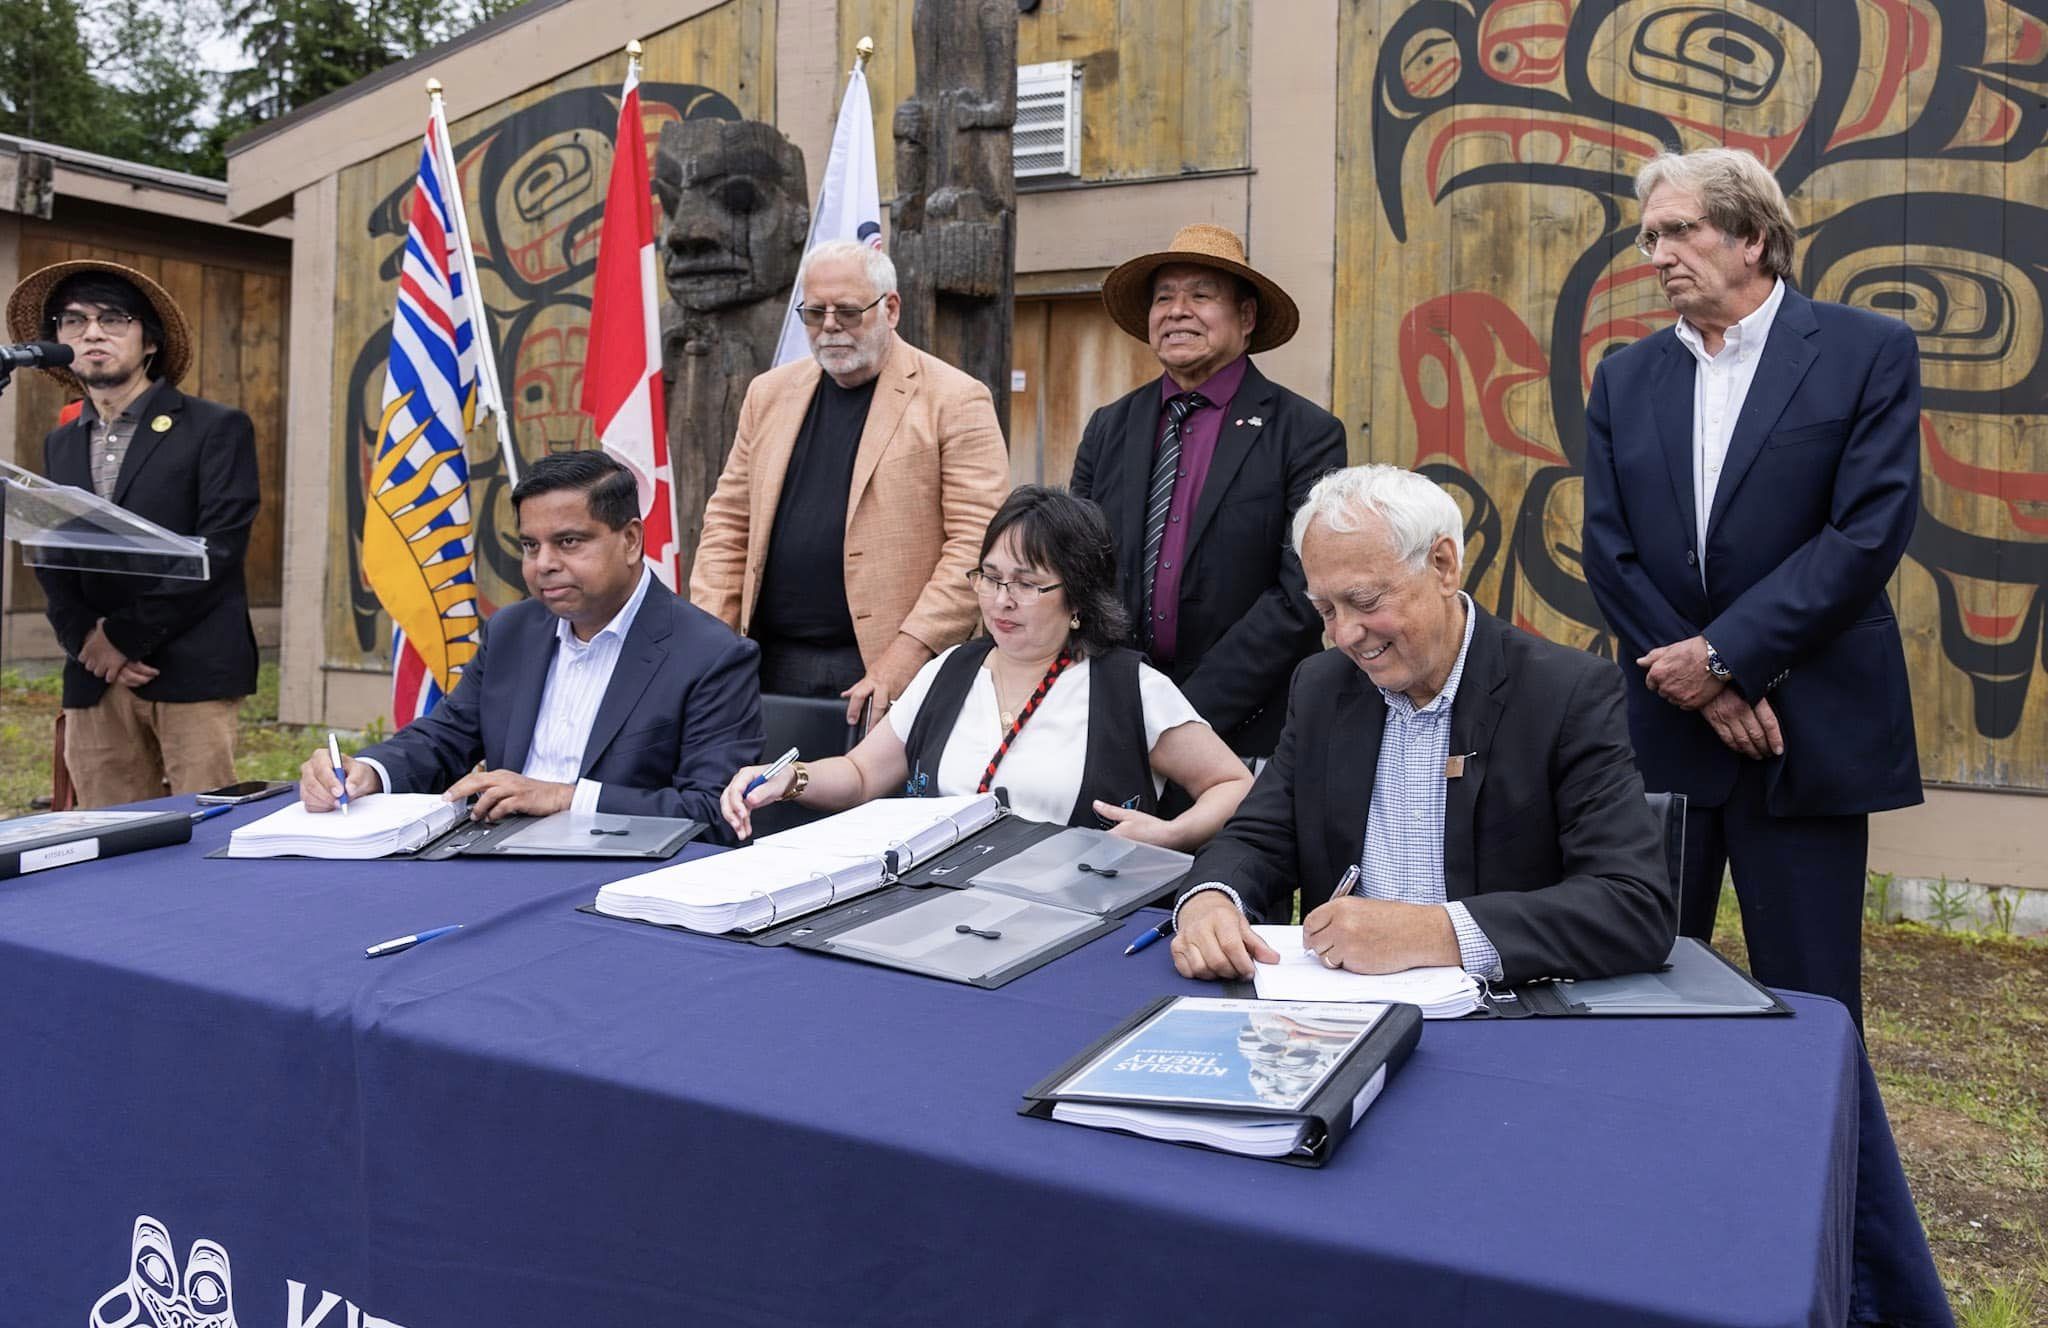 Assembled leaders and elected officials sign landmark agreement with two First Nations